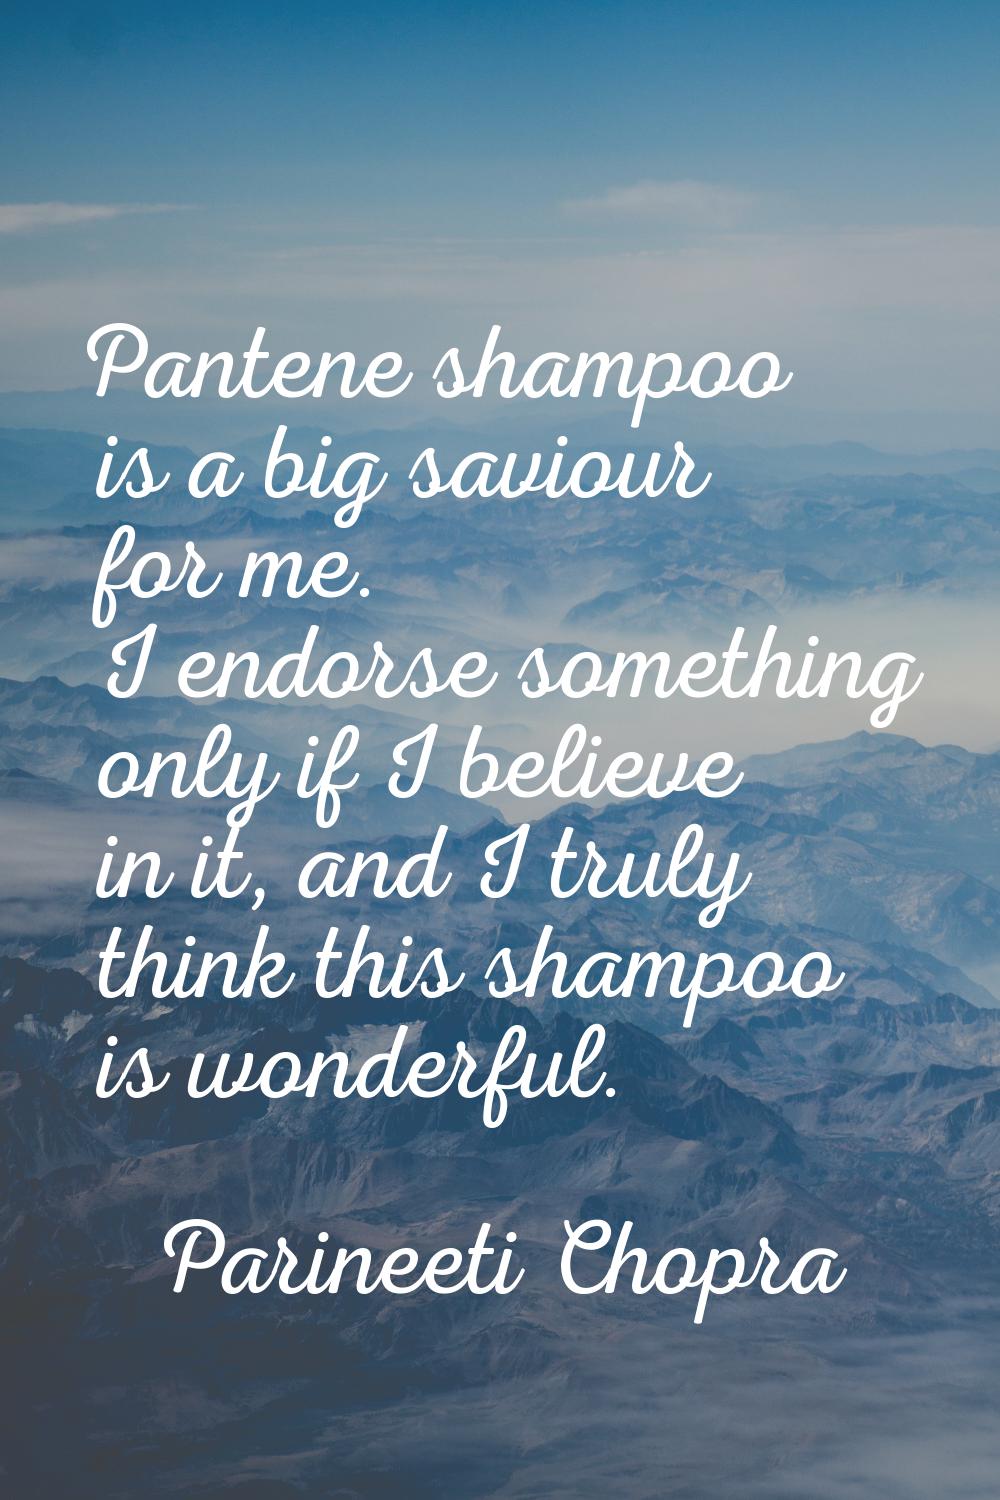 Pantene shampoo is a big saviour for me. I endorse something only if I believe in it, and I truly t